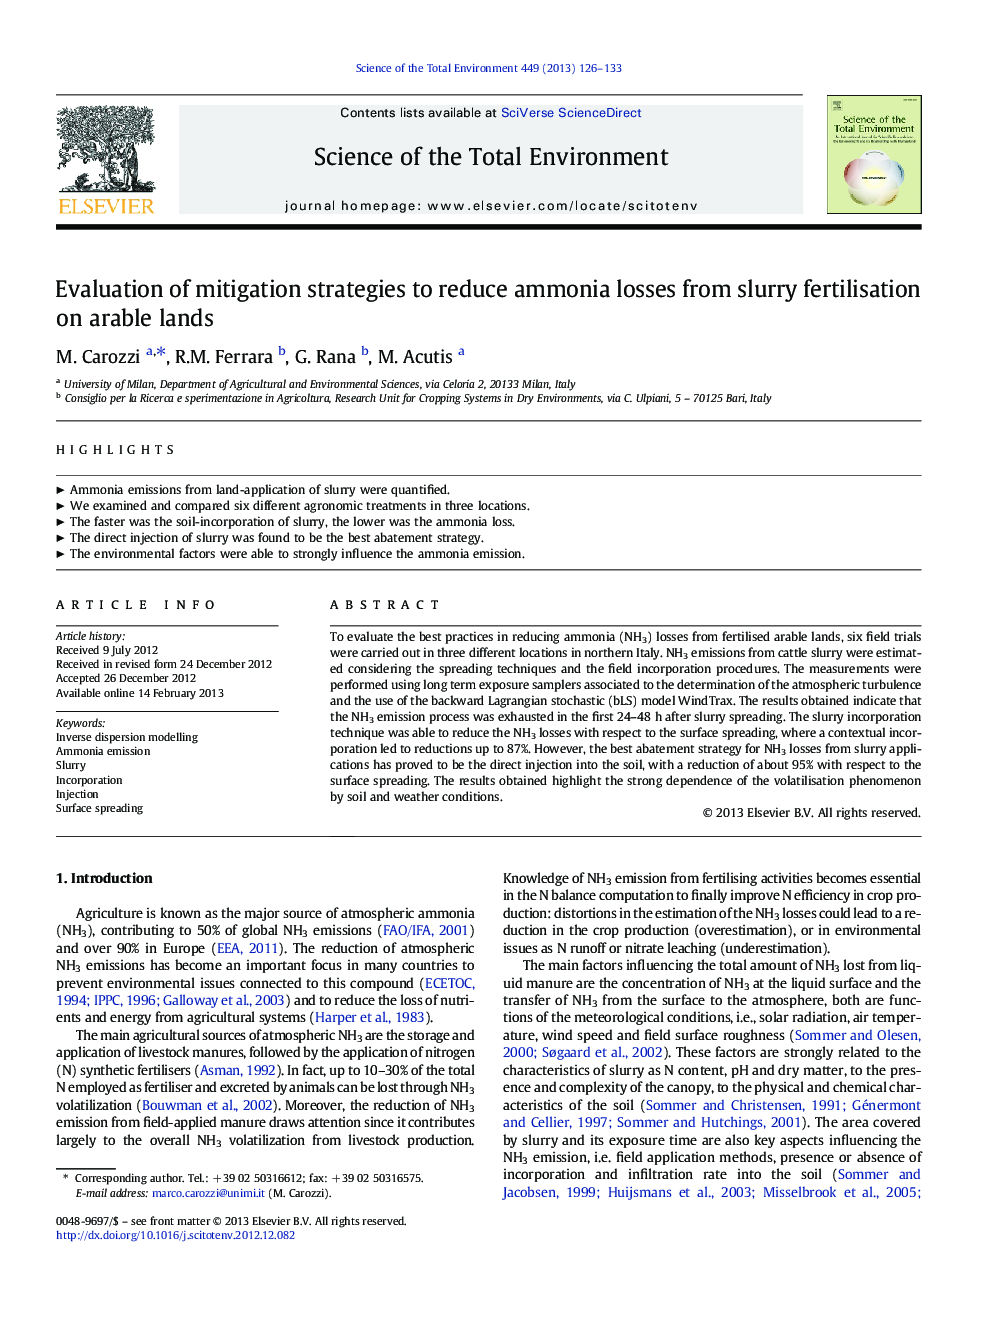 Evaluation of mitigation strategies to reduce ammonia losses from slurry fertilisation on arable lands